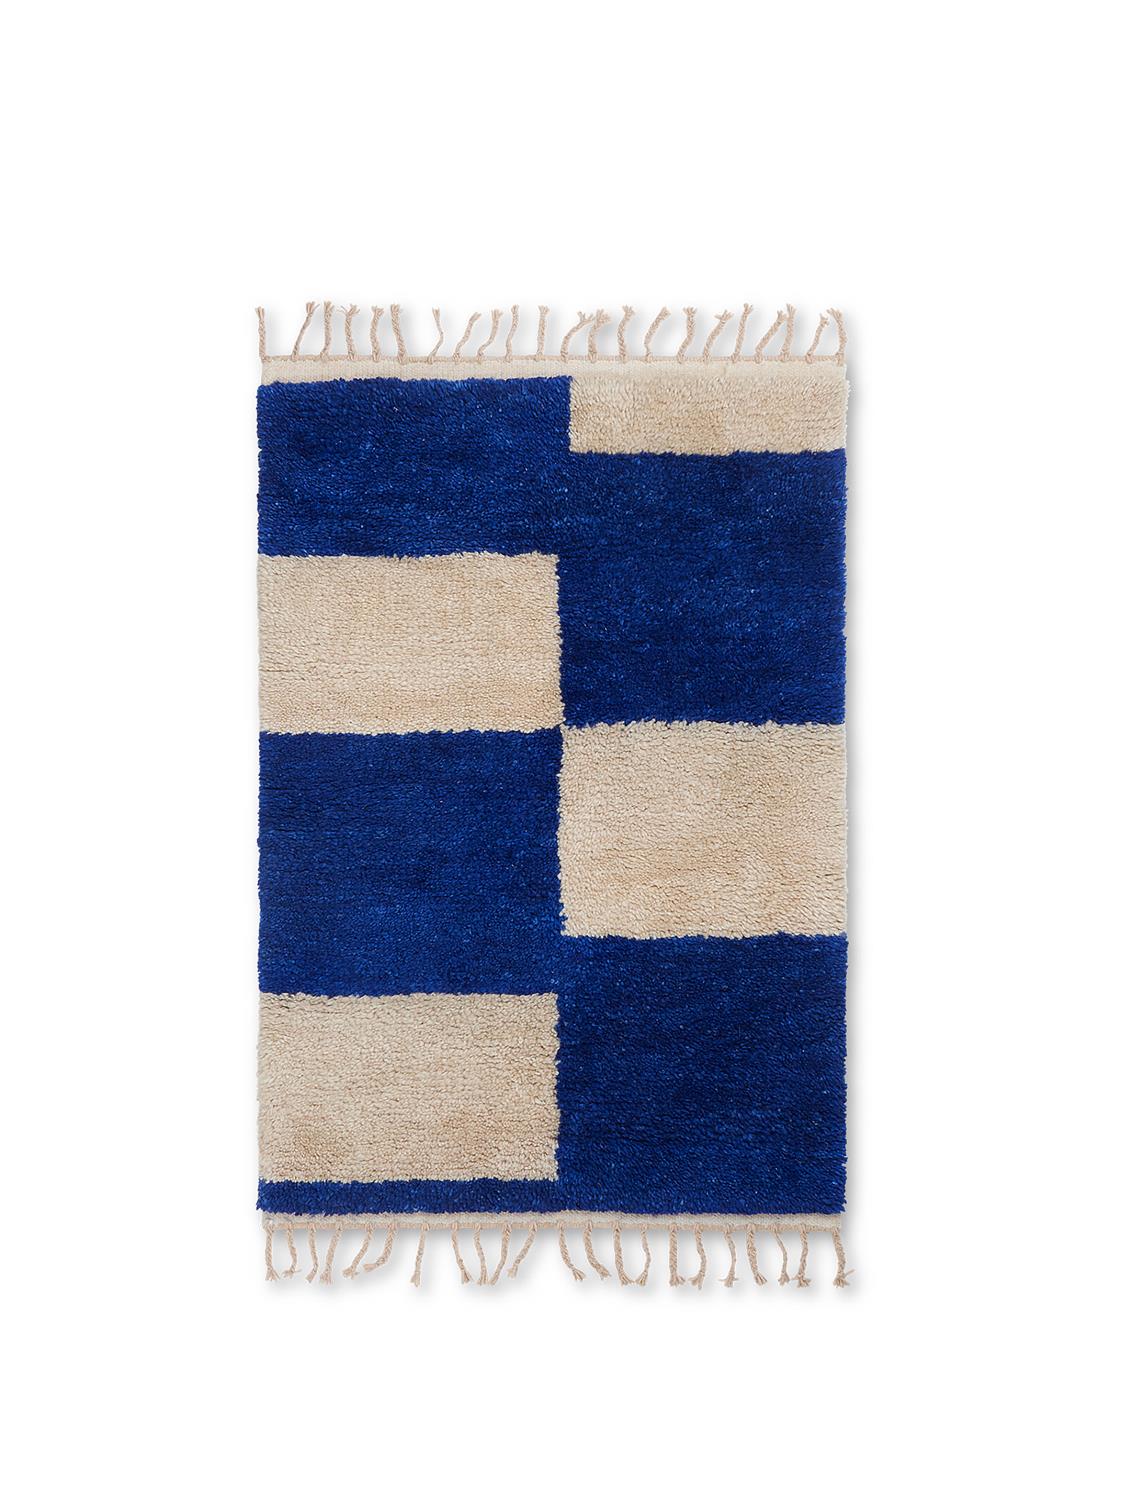 Ferm Living - Mara Knotted Rug - Small - Bright Blue and Off White